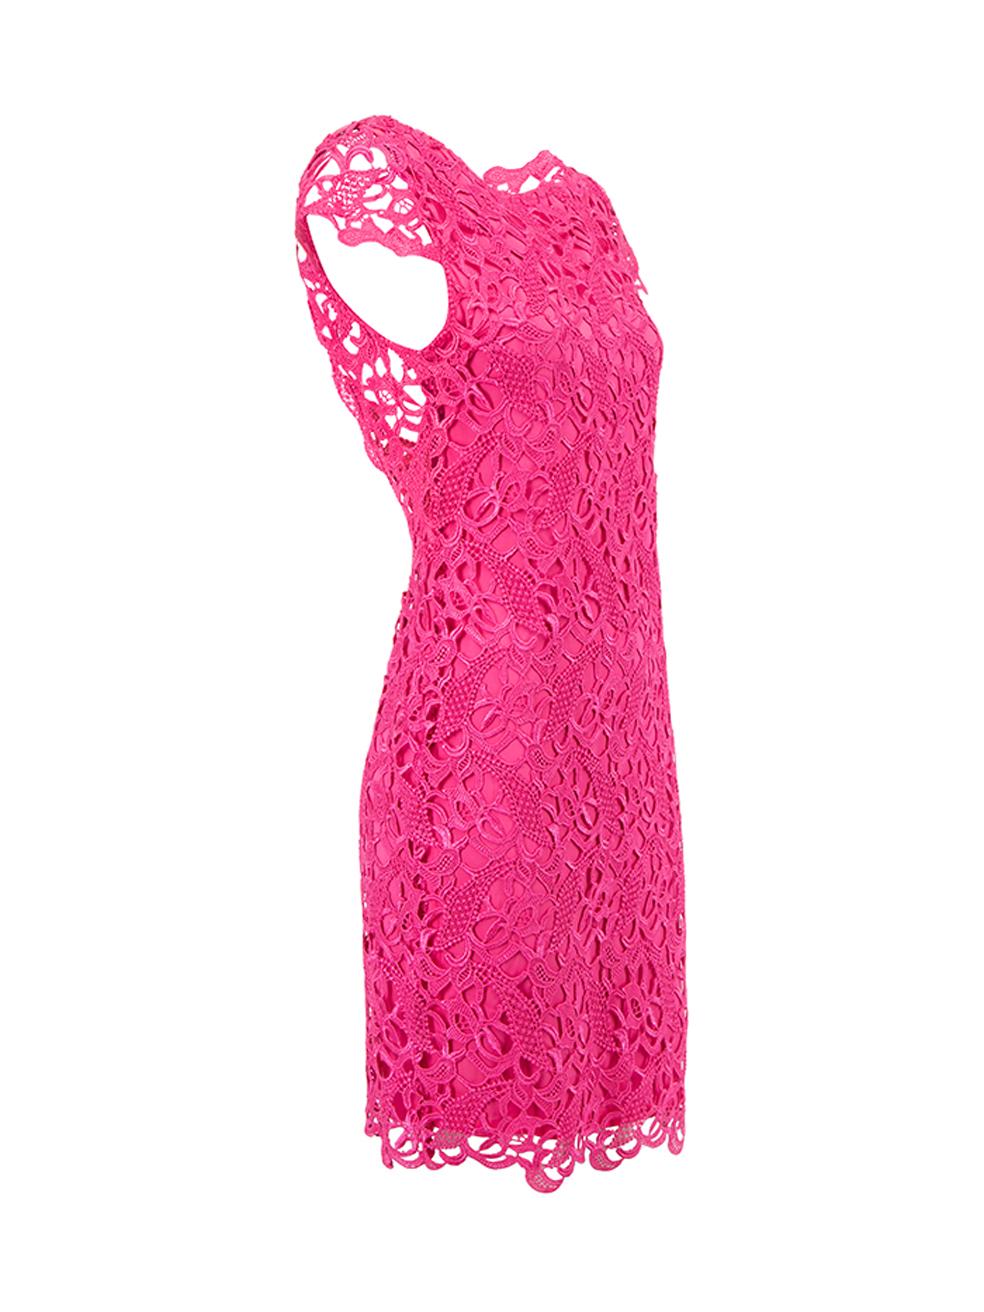 CONDITION is Very good. Minimal wear to dress is evident. Minimal loose threads around the neckline on this used Alice + Olivia designer resale item. 
 
 Details
  Pink
 Lace
 Mini dress
 Round neckline
 Short cap sleeves
 Open back
 Button and zip